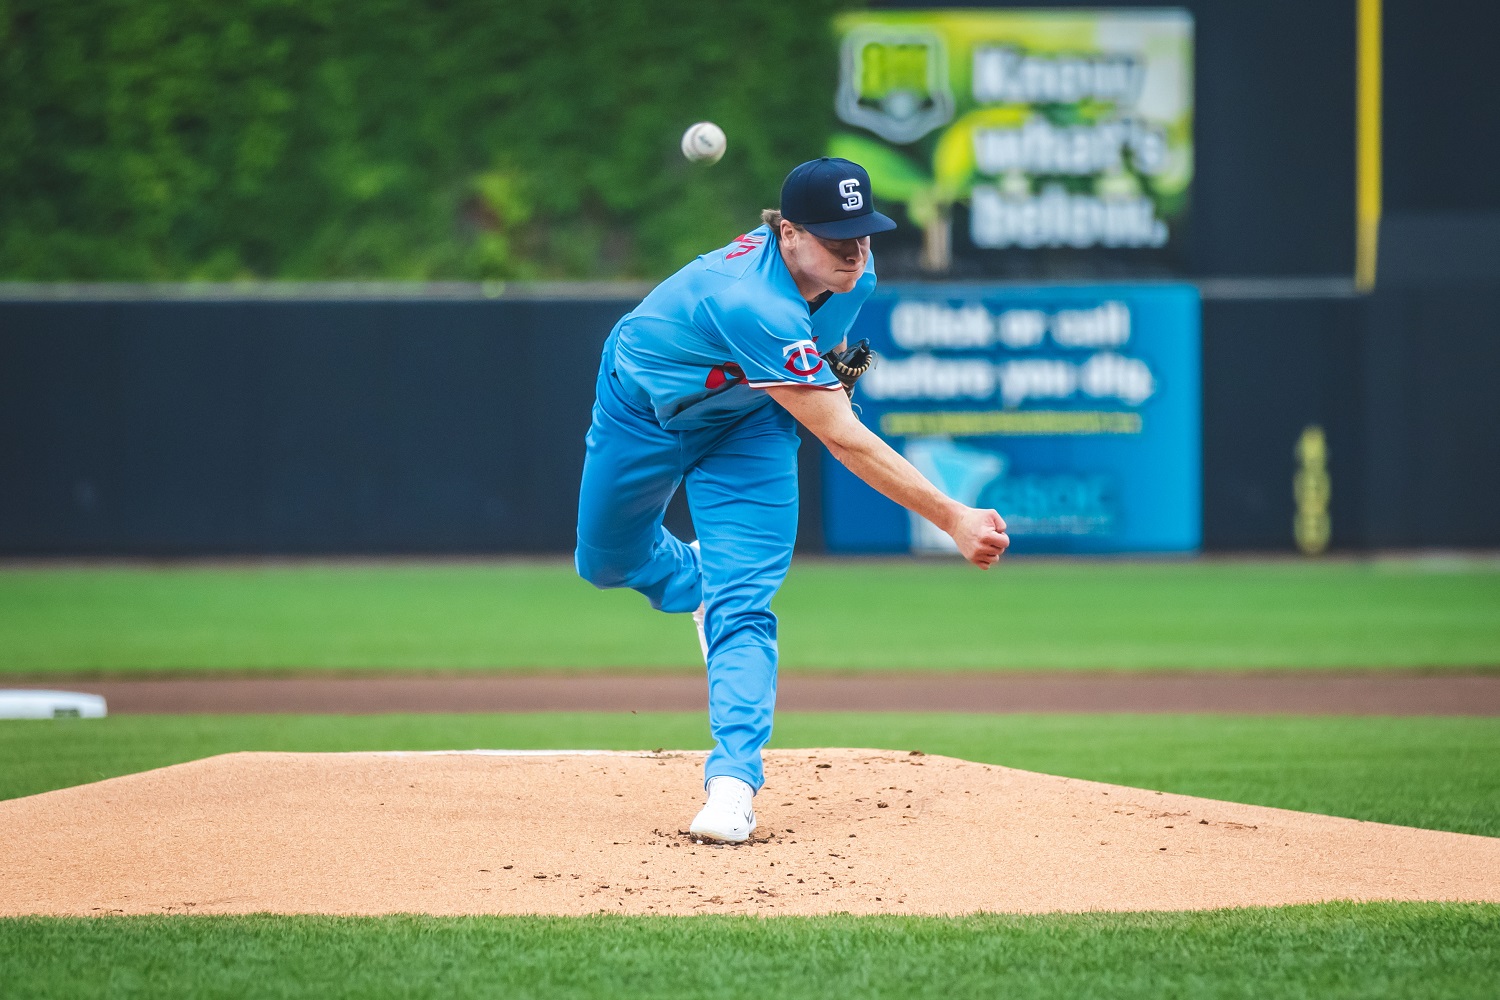 Twins Daily 2021 Minor League Starting Pitcher of the Year: Louie Varland -  Minor Leagues - Twins Daily